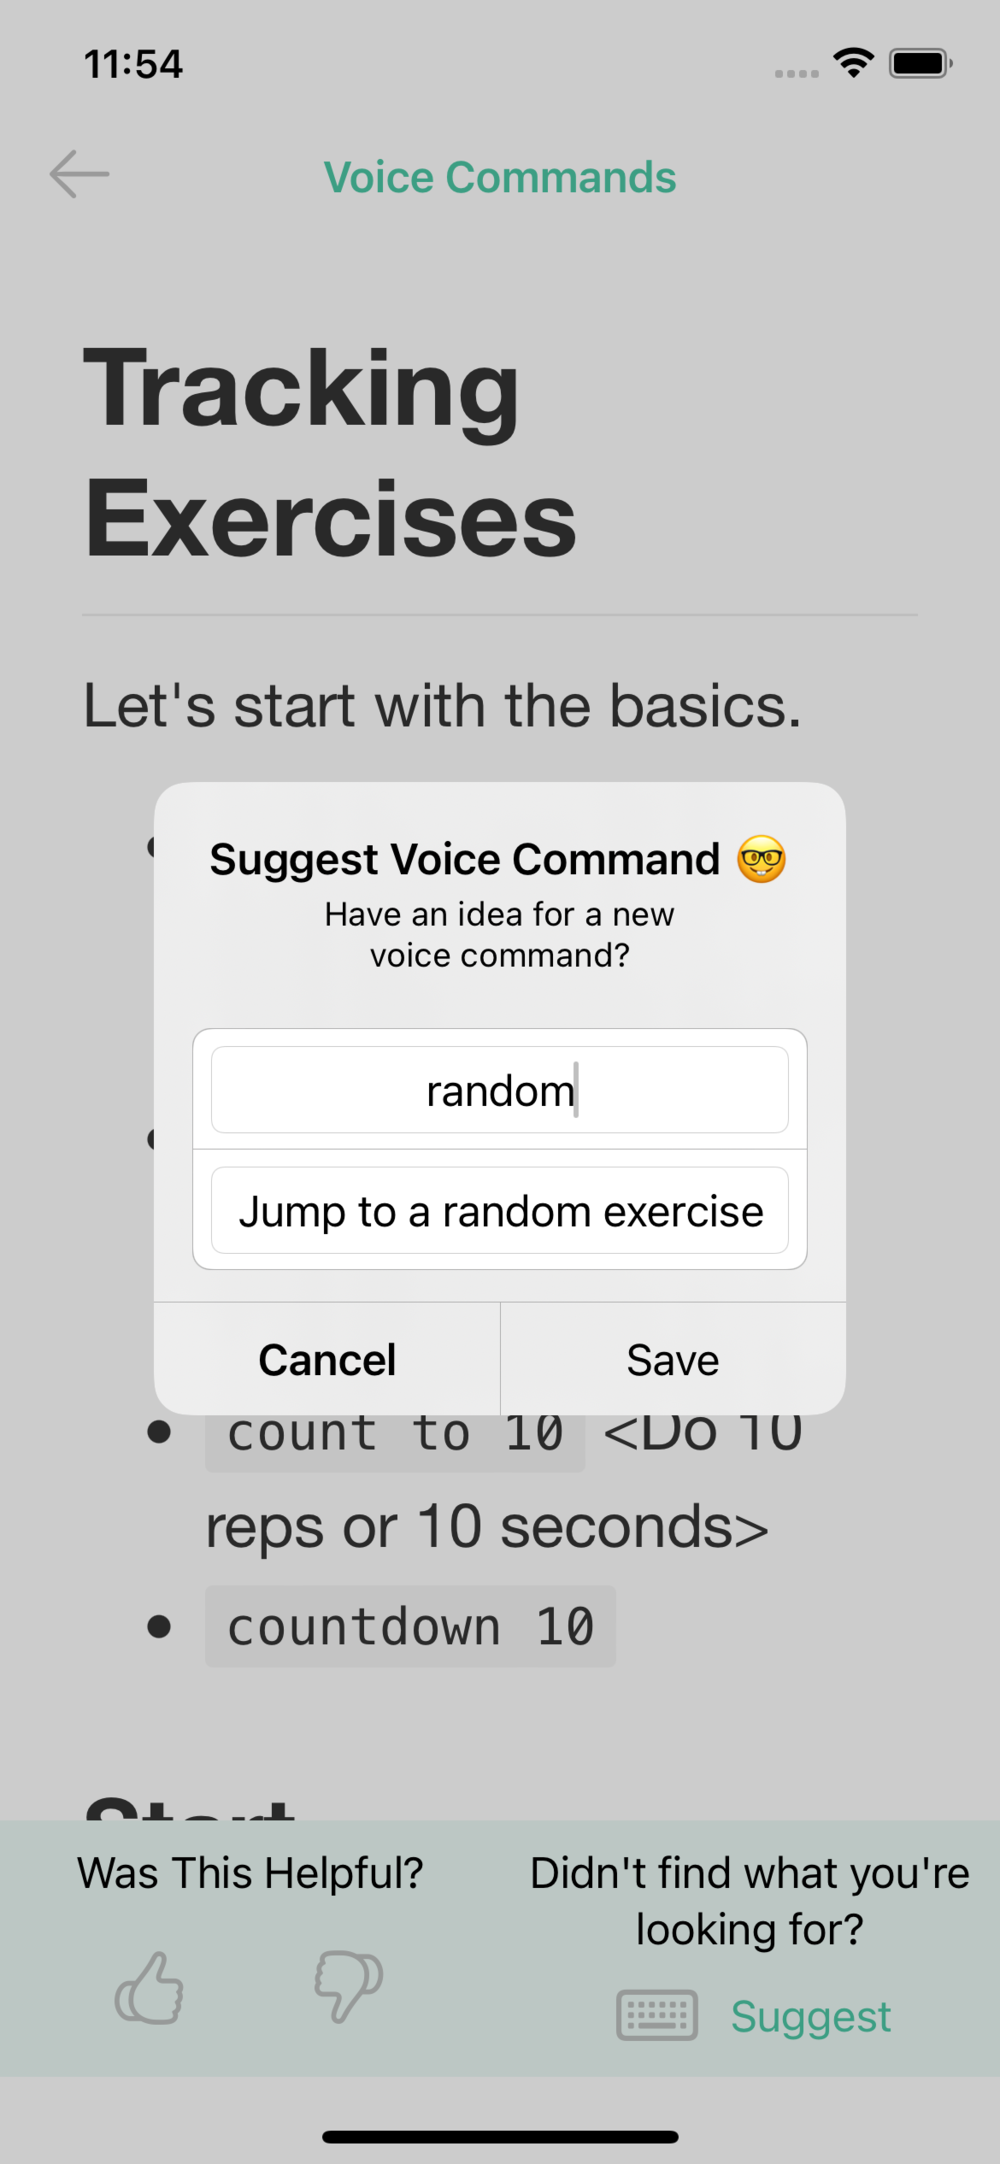 Suggest new voice commands you think will be useful to you